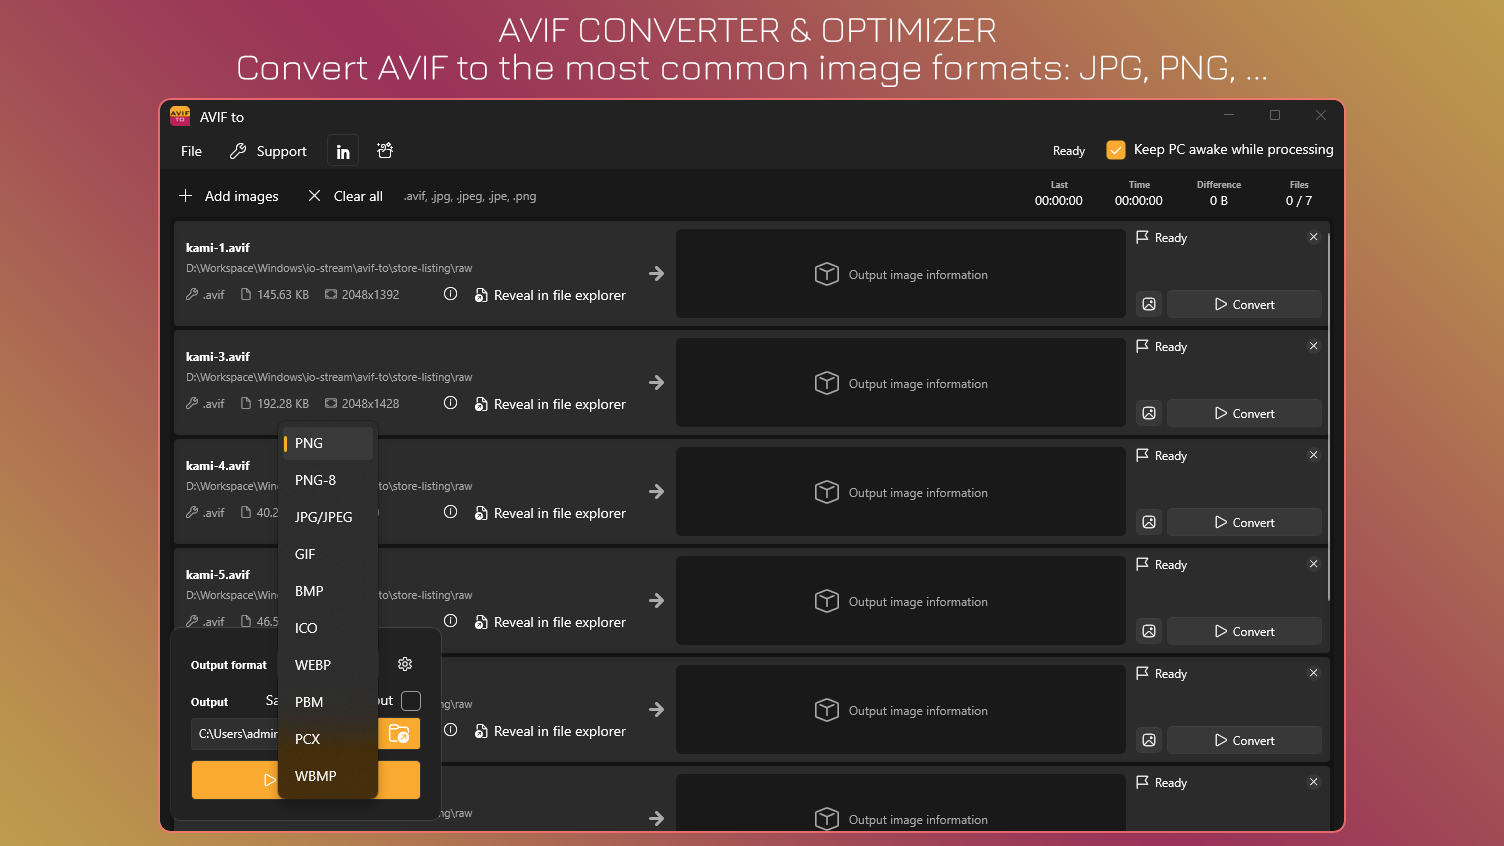 AVIF Converter & Optimizer - Convert AVIF to the most common image formats: JPG, PNG, ...